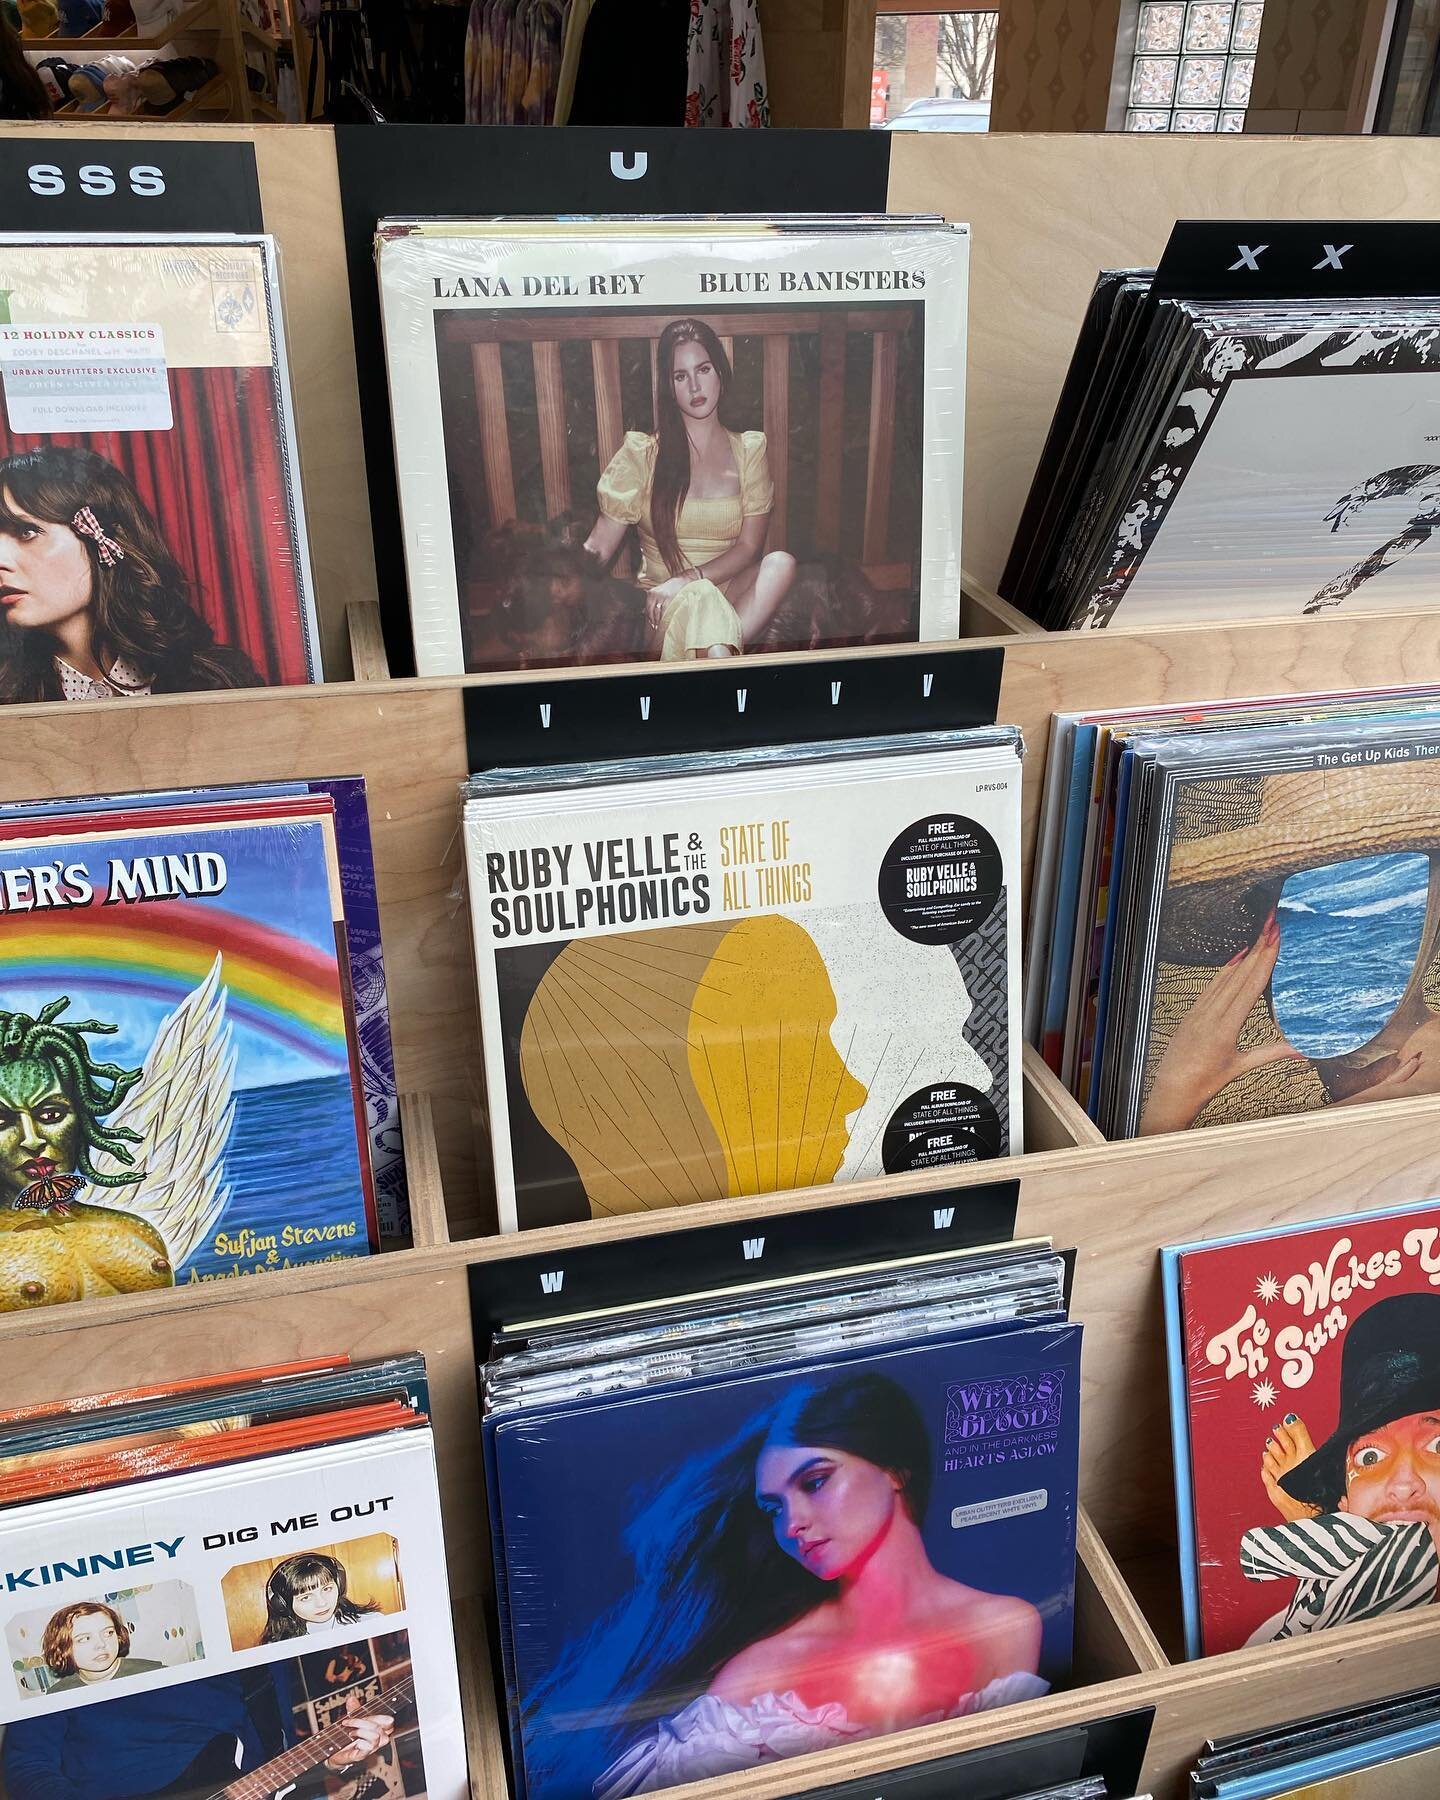 Holy 🤯 soulfam Batman, what a way to start the new year! @mistermind finding our  #vinyl LP front and center on the shelf at @urbanoutfitters #atl 🙌🏽🙌🏽🙌🏽 #vinylallday #urbanoutfitters #stateofallthings #atlmusic #atlsoul #onwax #rubyvelle #rub